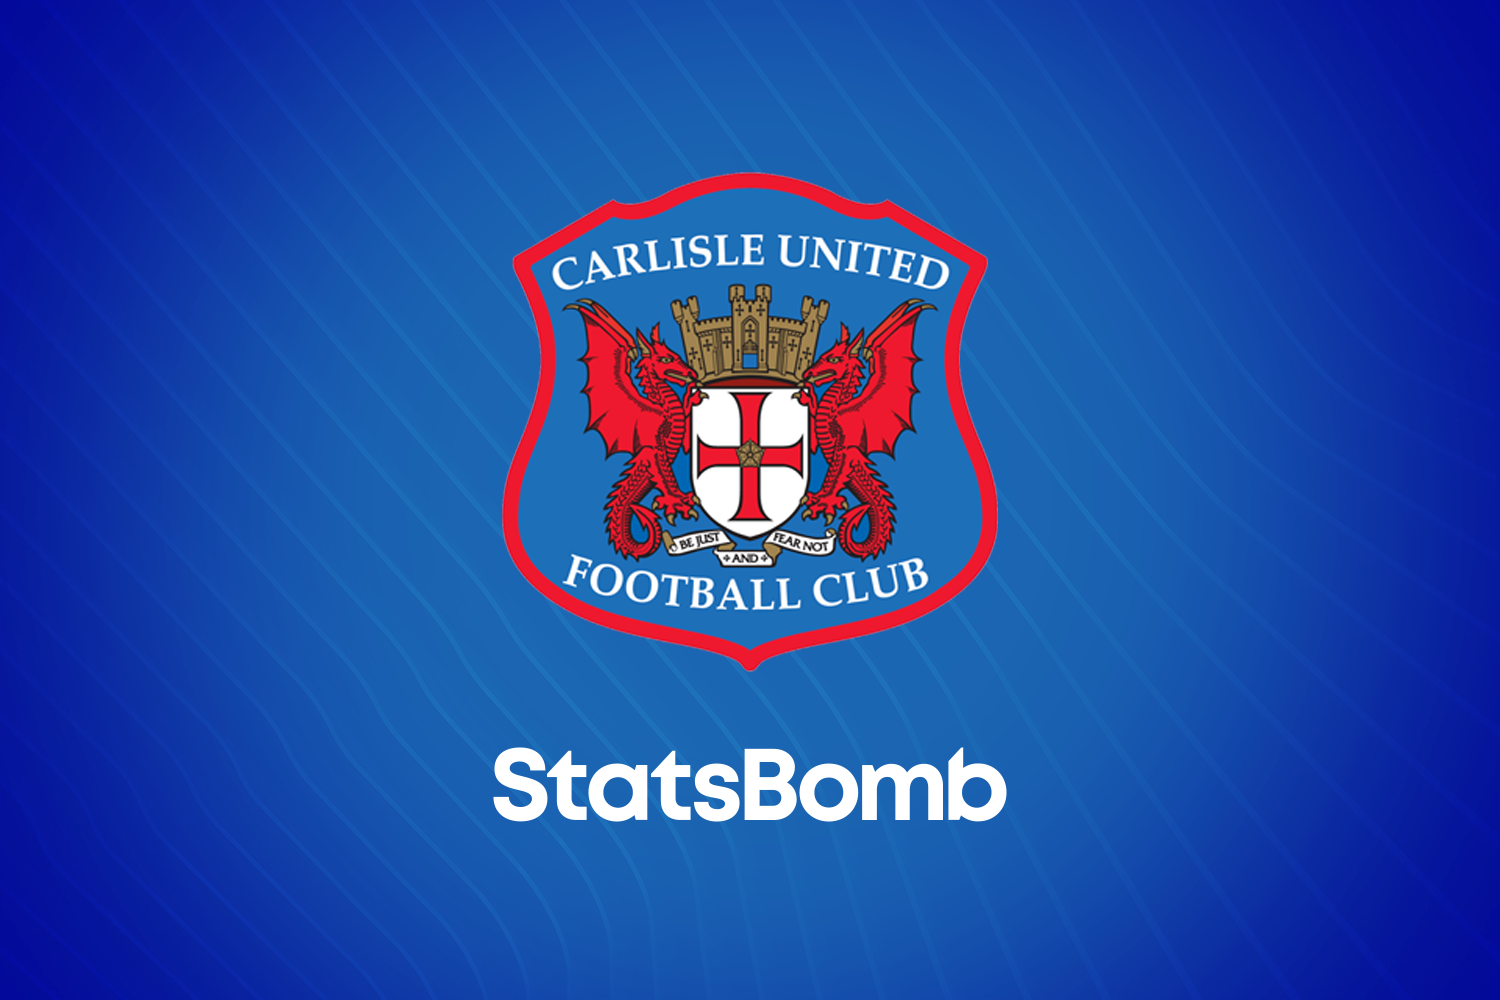 StatsBomb Continue To Grow Presence In League One With Carlisle United Partnership